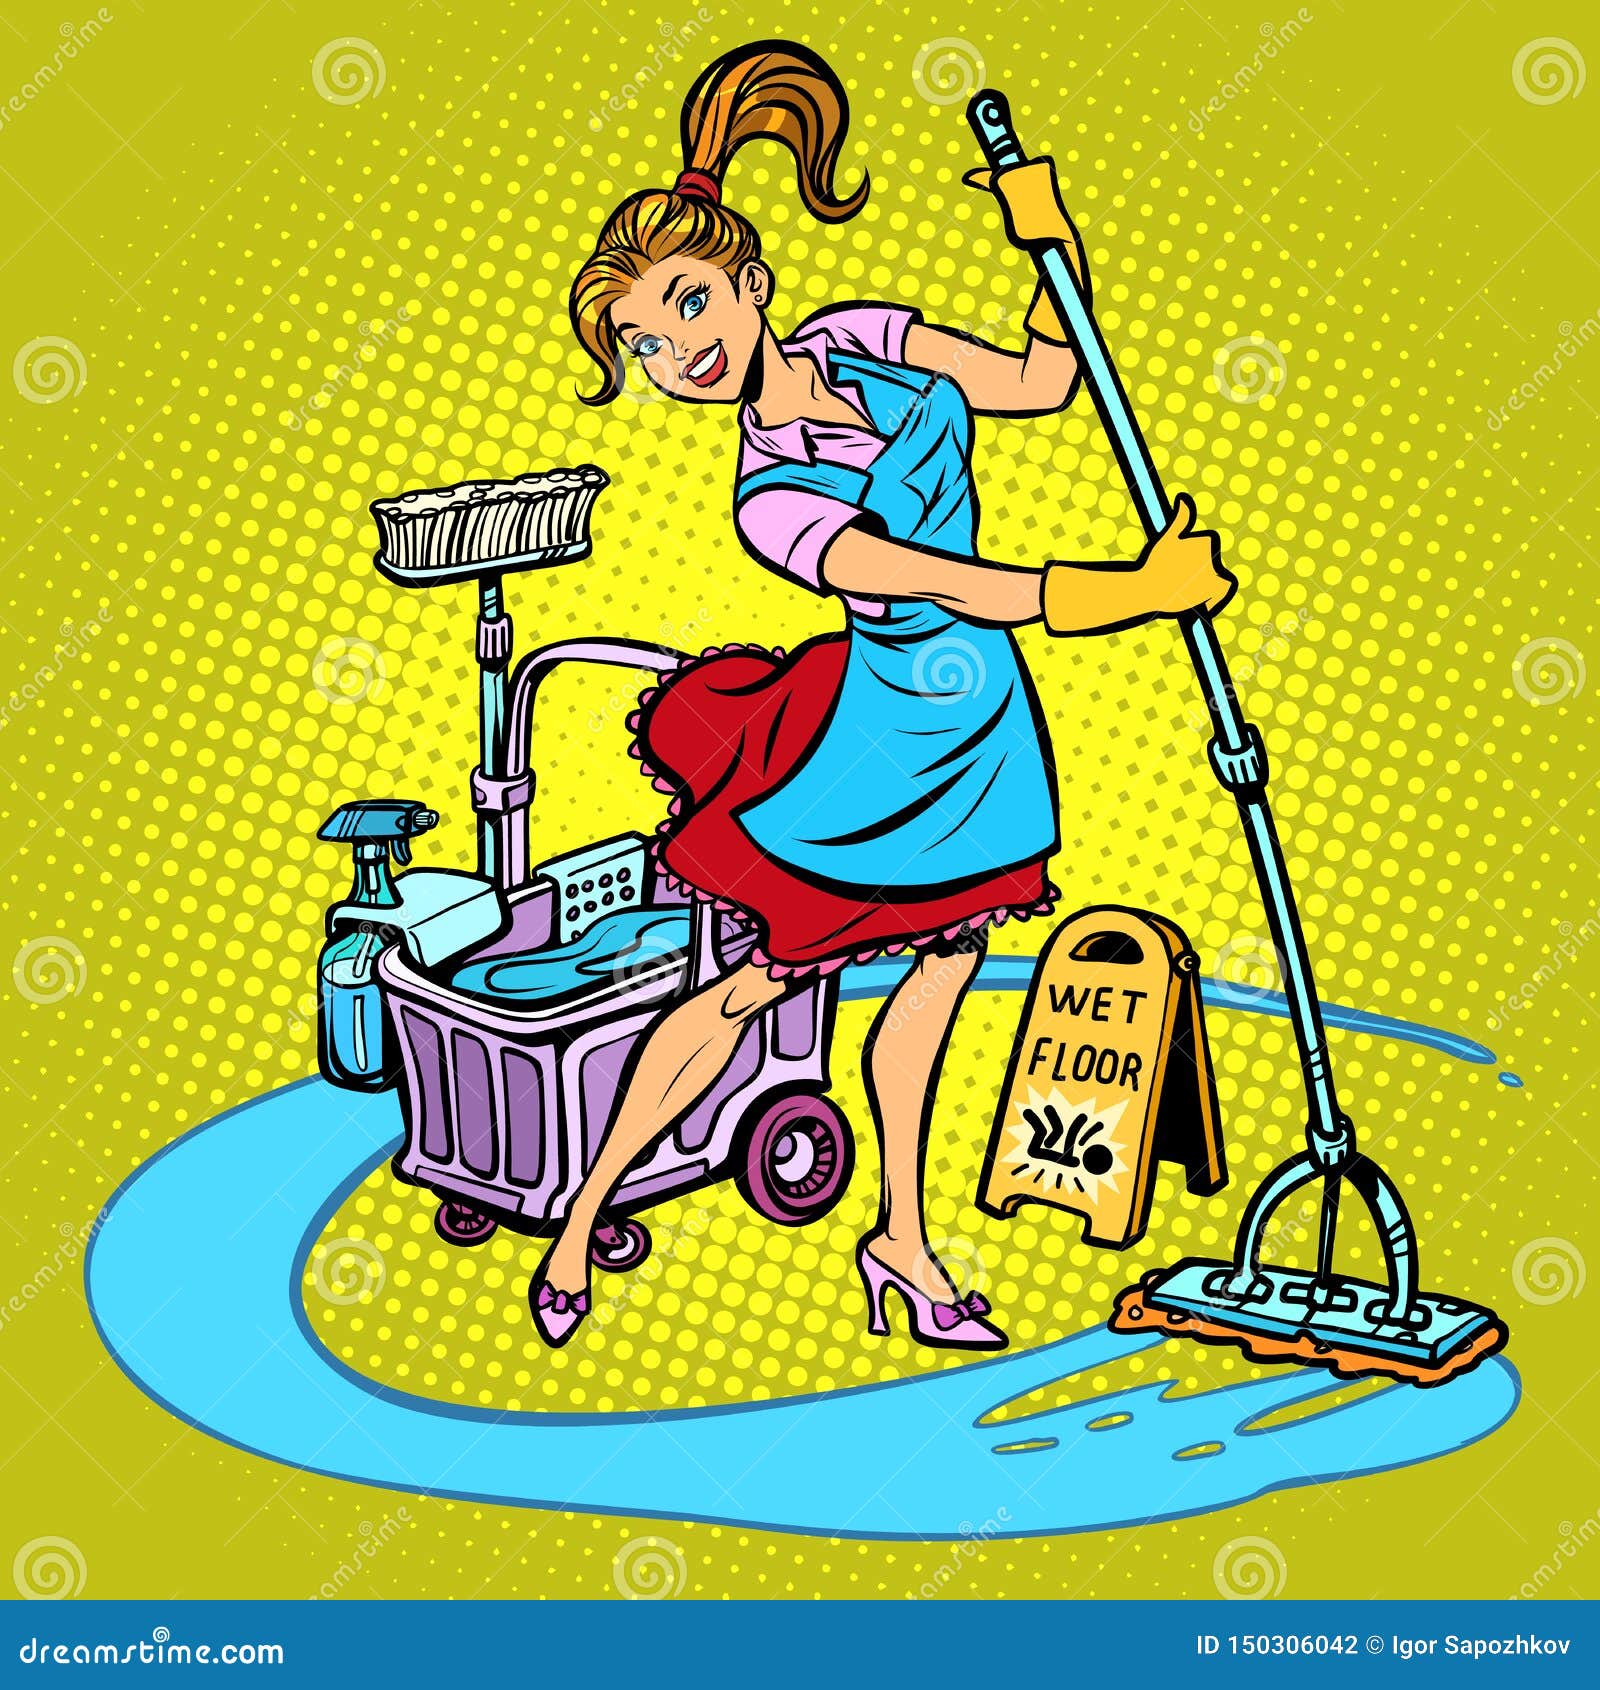 16+ Thousand Cartoon Cleaning Woman Royalty-Free Images, Stock